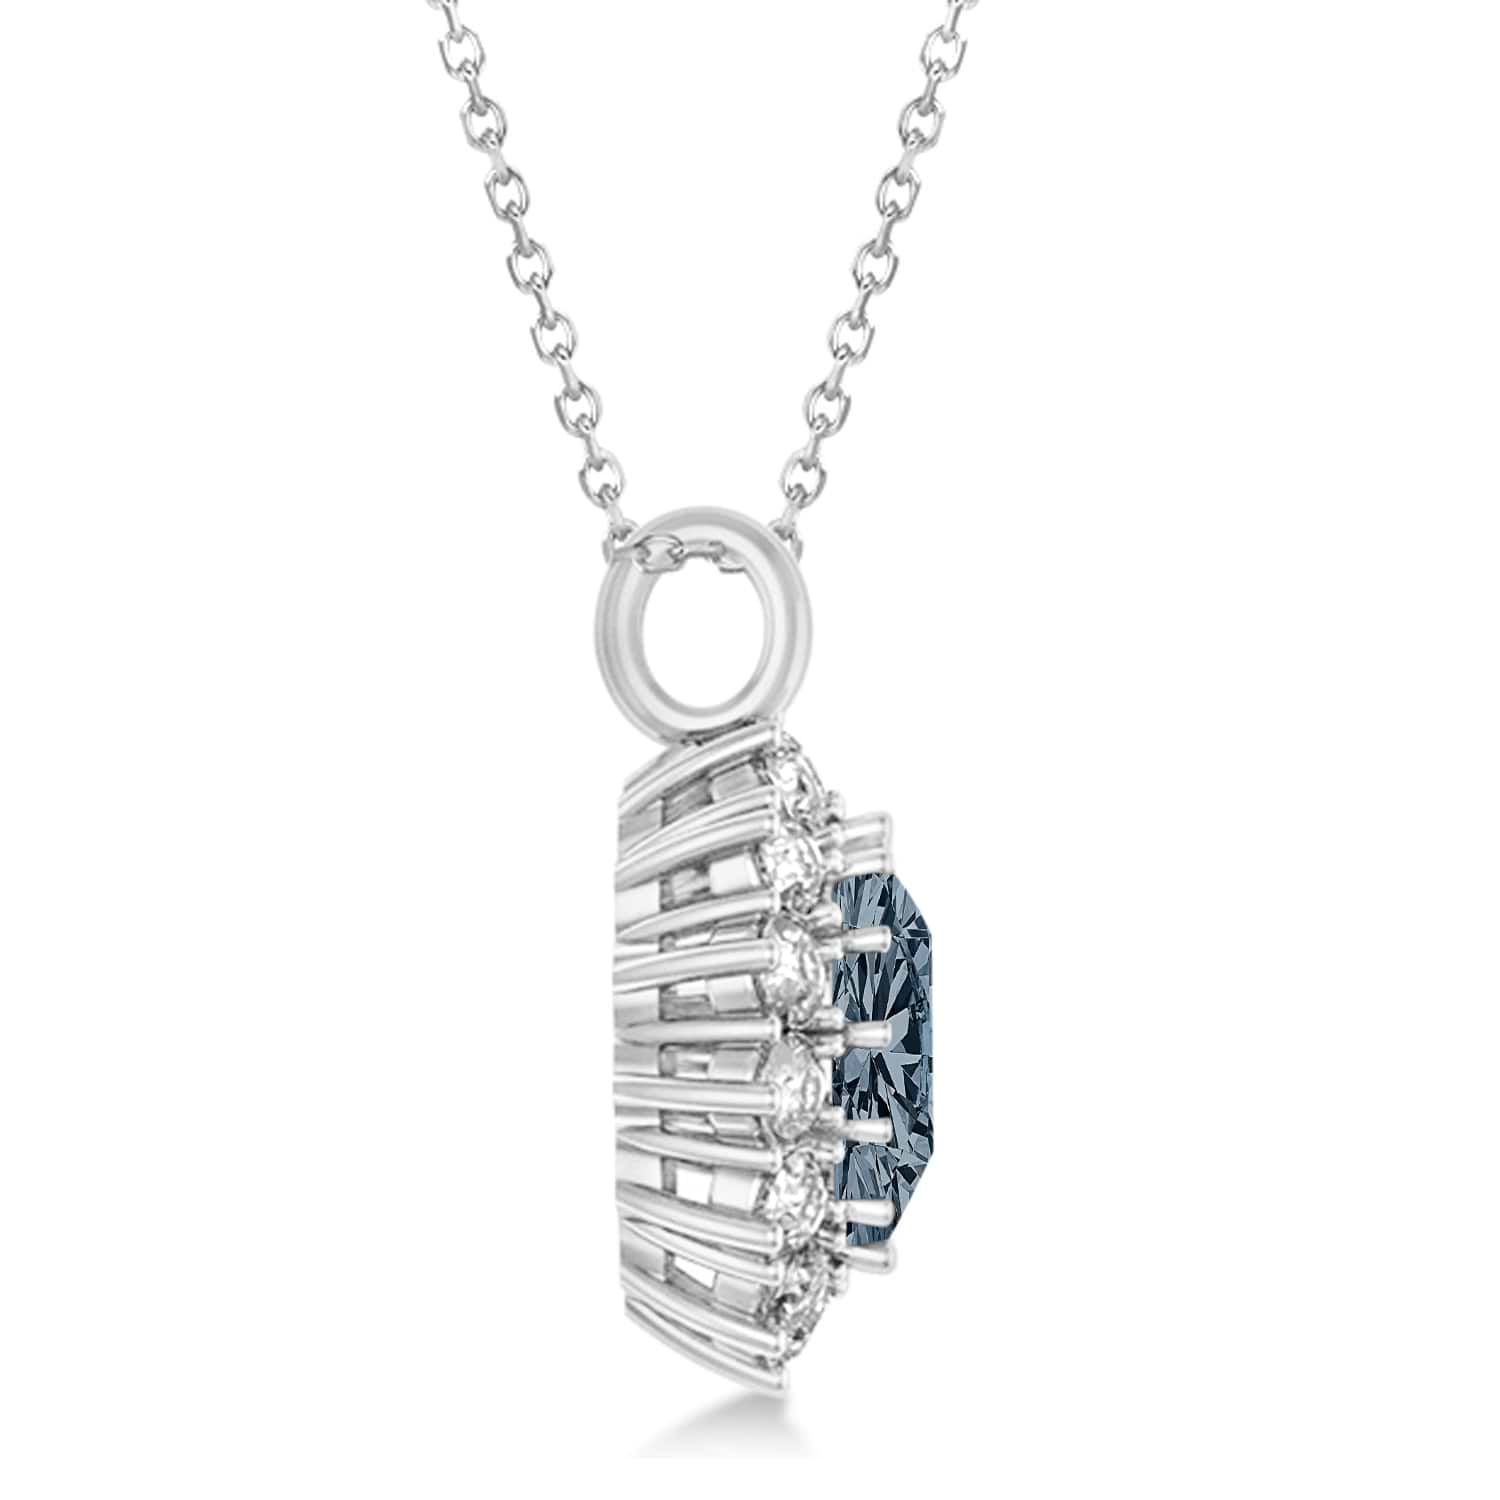 Oval Gray Spinel and Diamond Pendant Necklace 18K White Gold (5.40ctw)